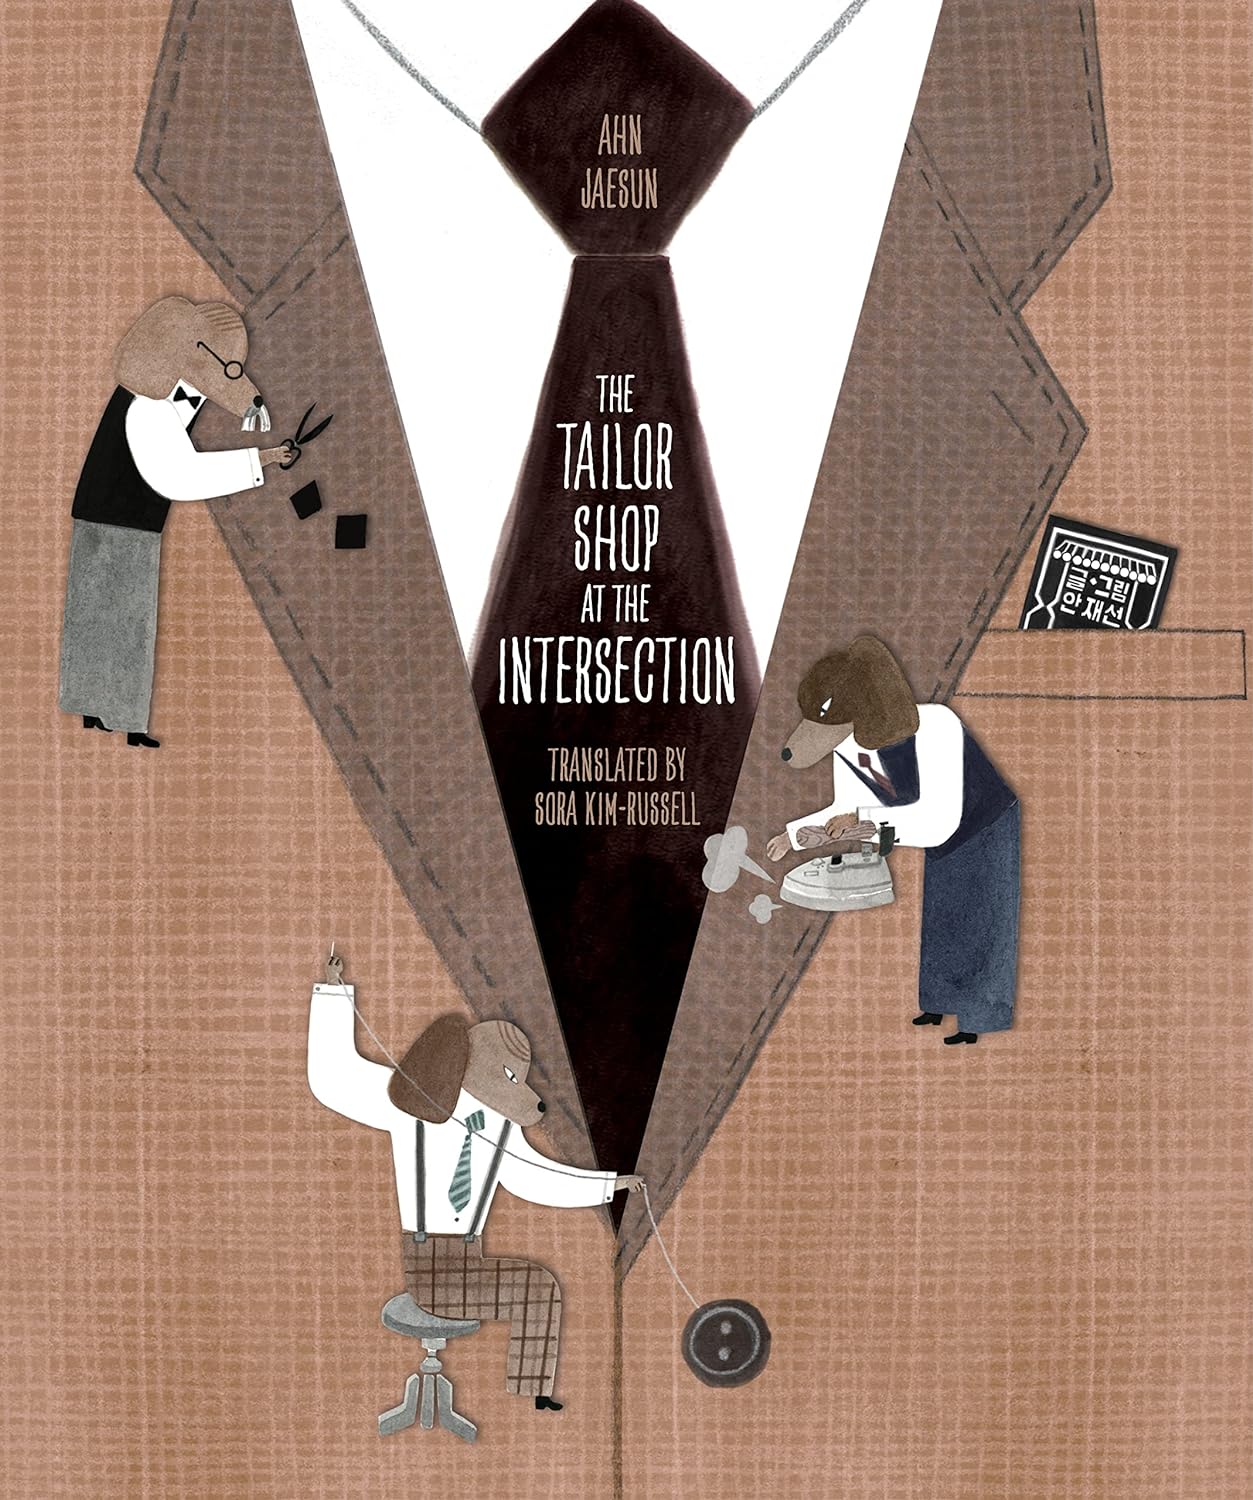 Cover for The Tailor Shop at the Intersection featuring a collage and illustrations depicting three smaller dog people sewing, ironing and cutting a brown suit which takes up the entire cover.